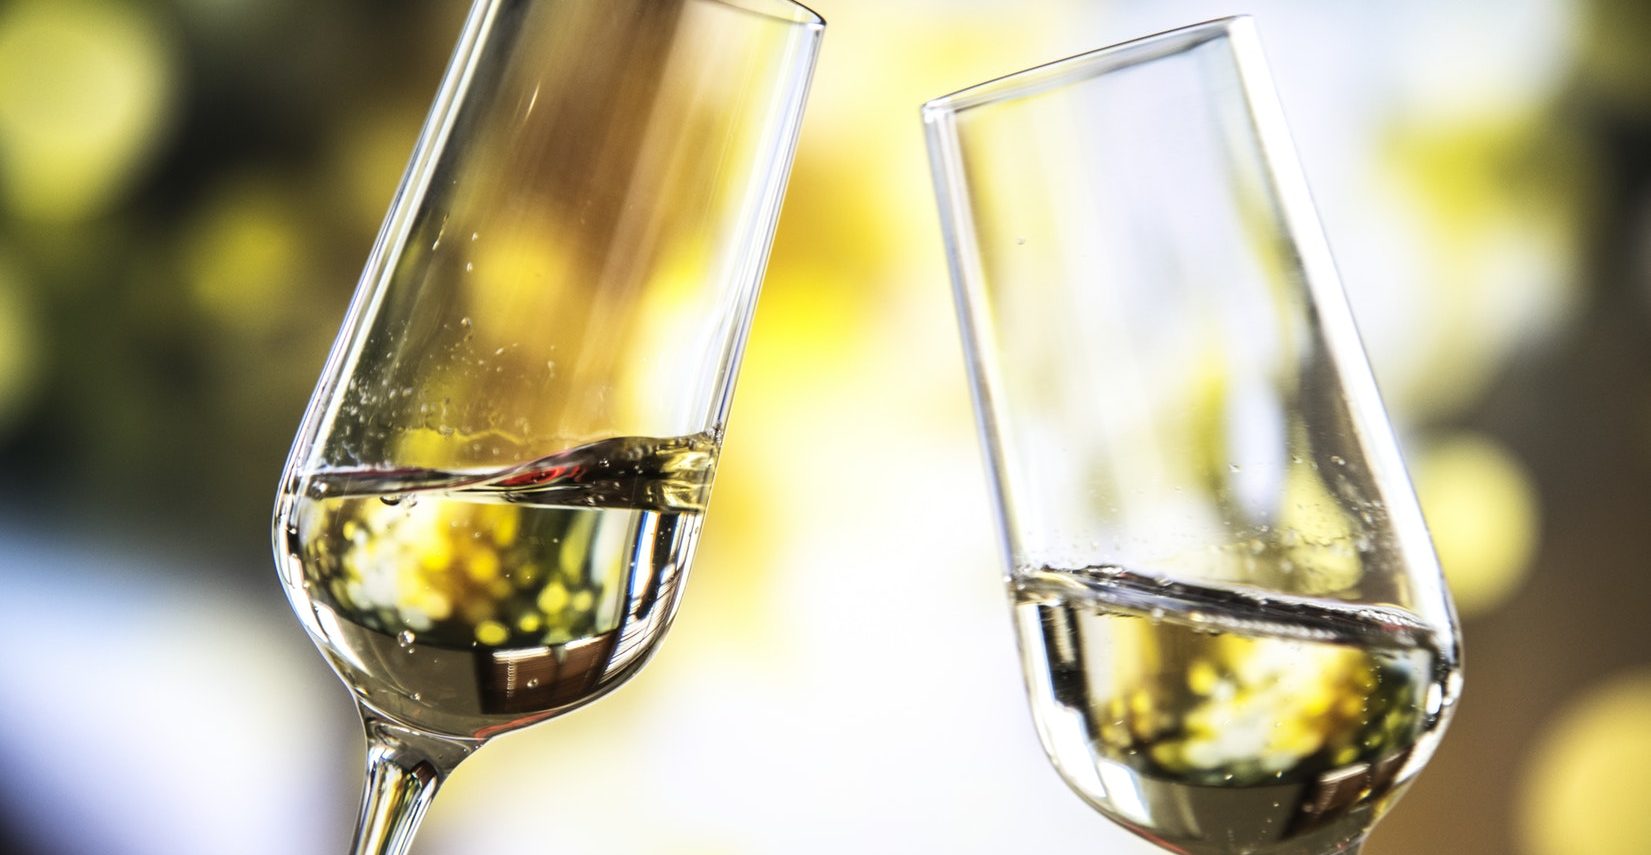 two flute glasses with white wine being toasted together